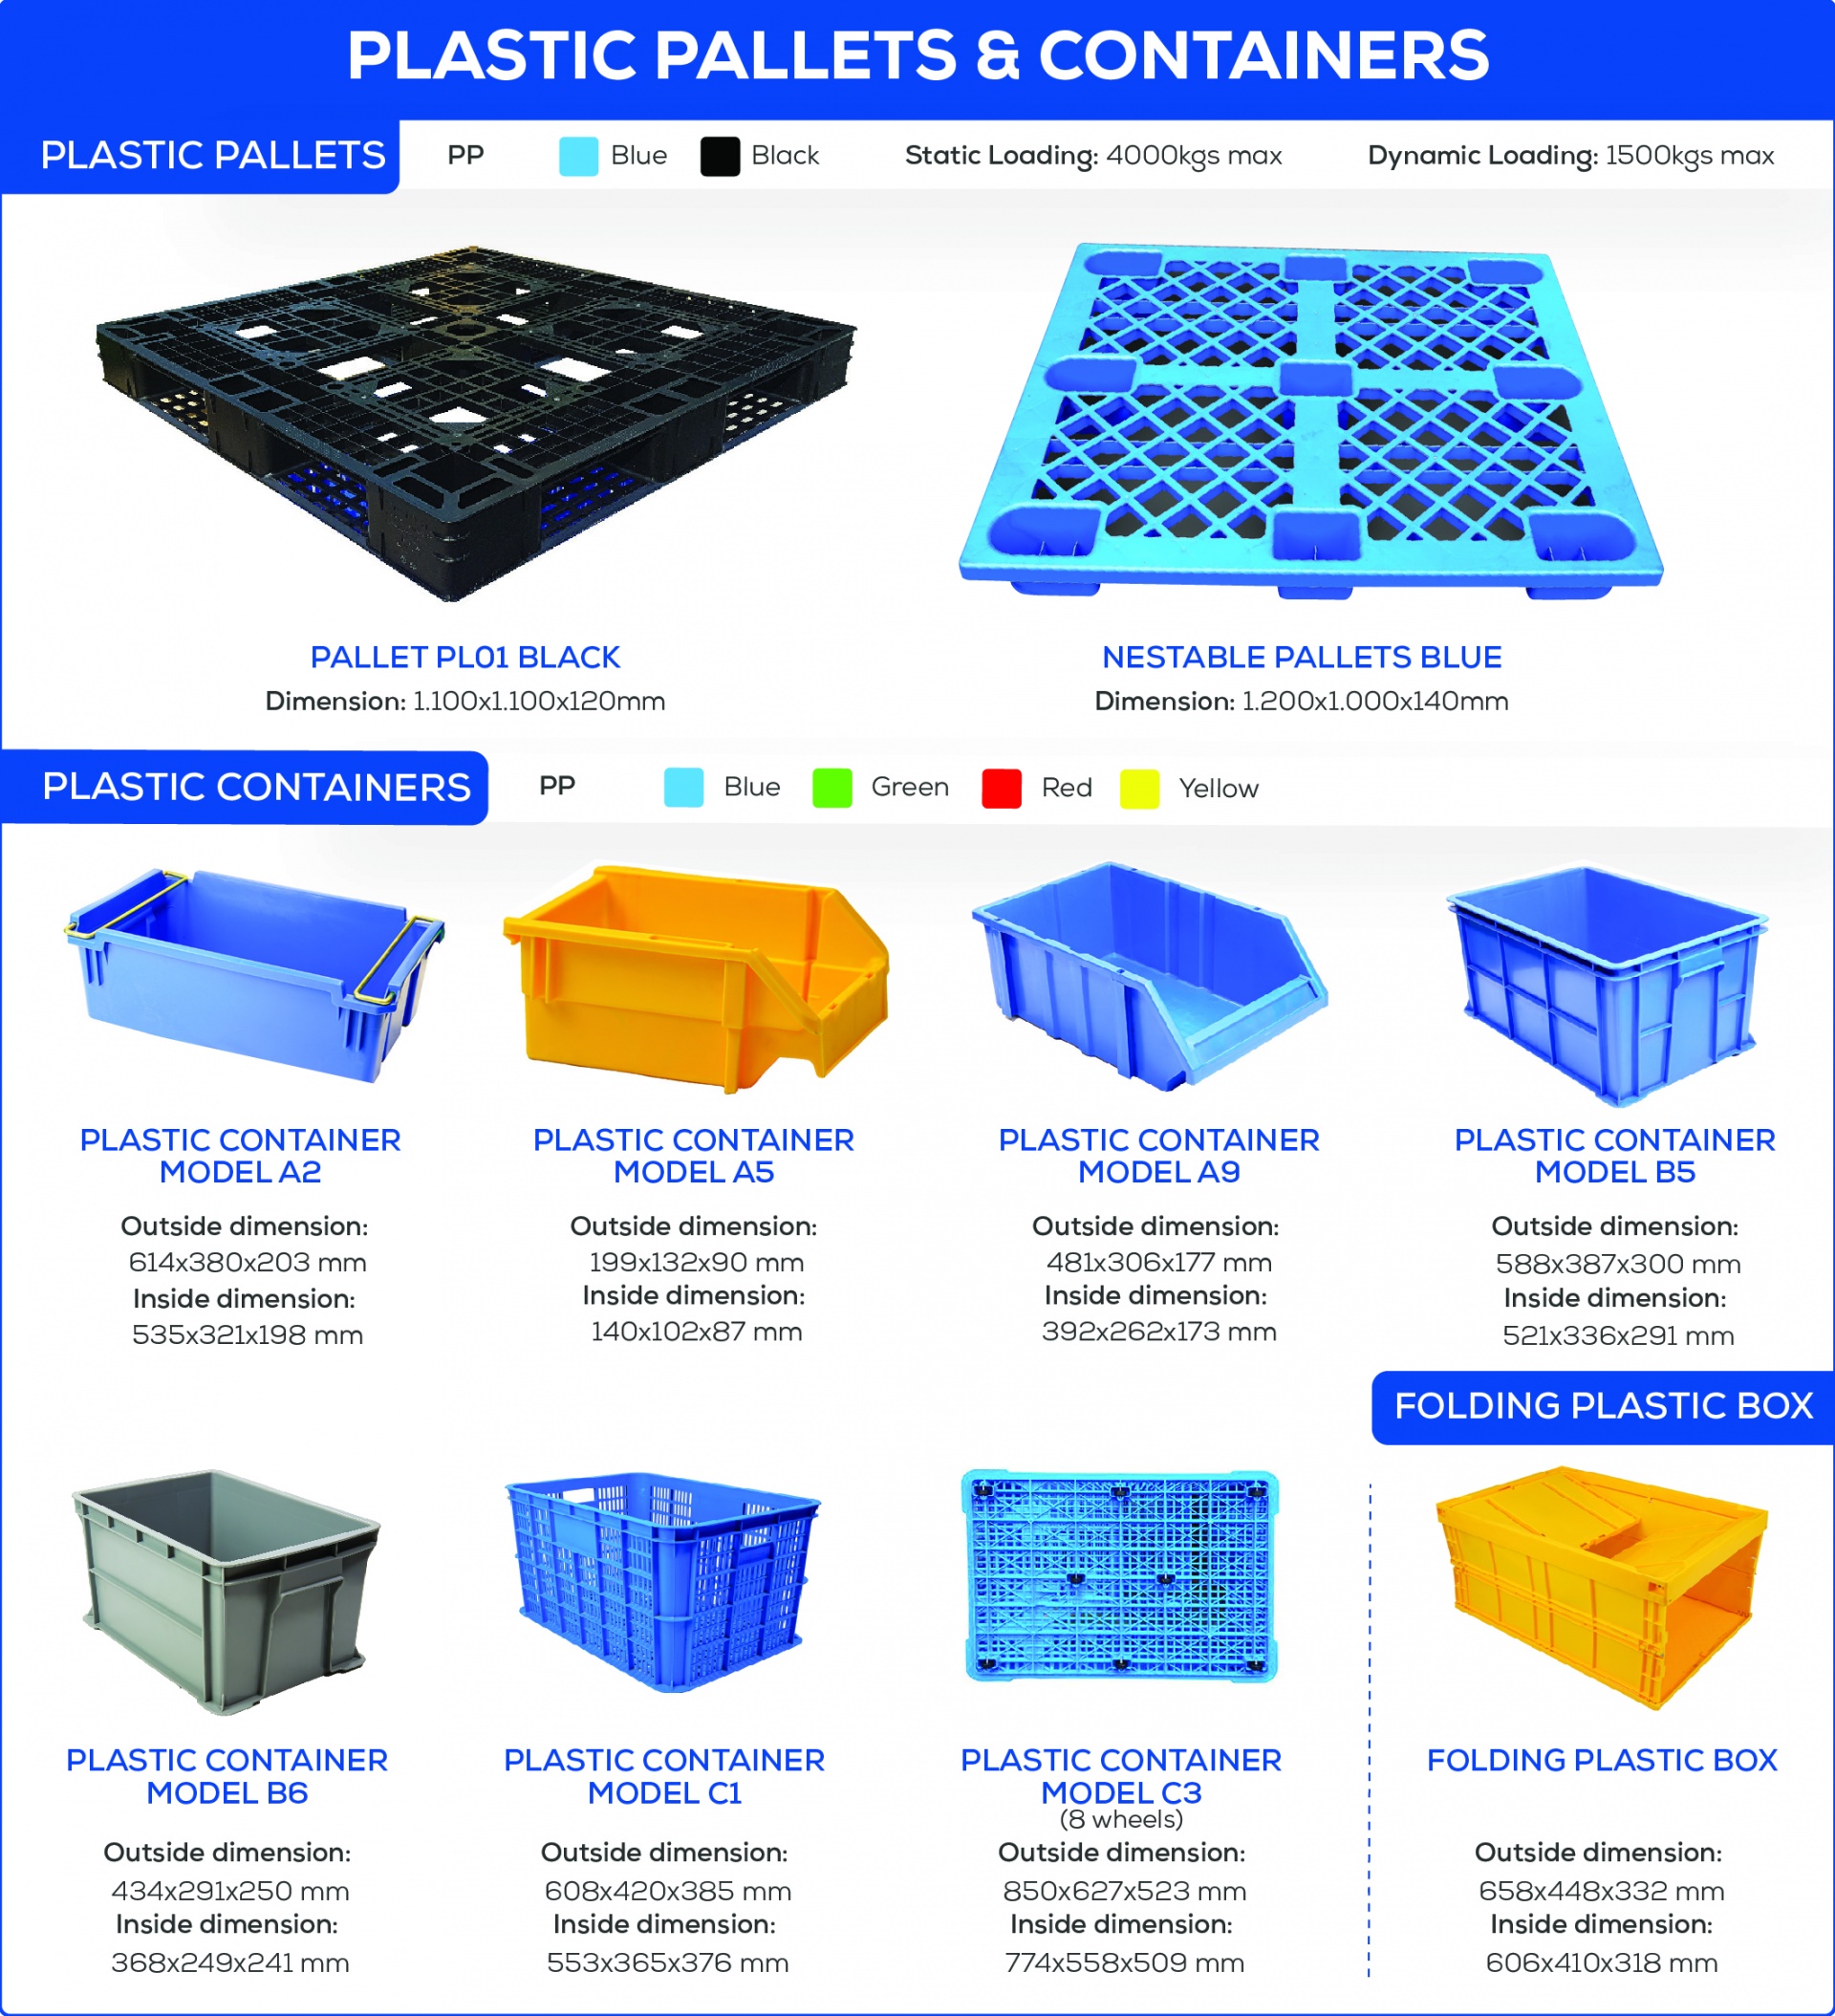 HPC’s plastic containers and pallets: 30 years of proud development